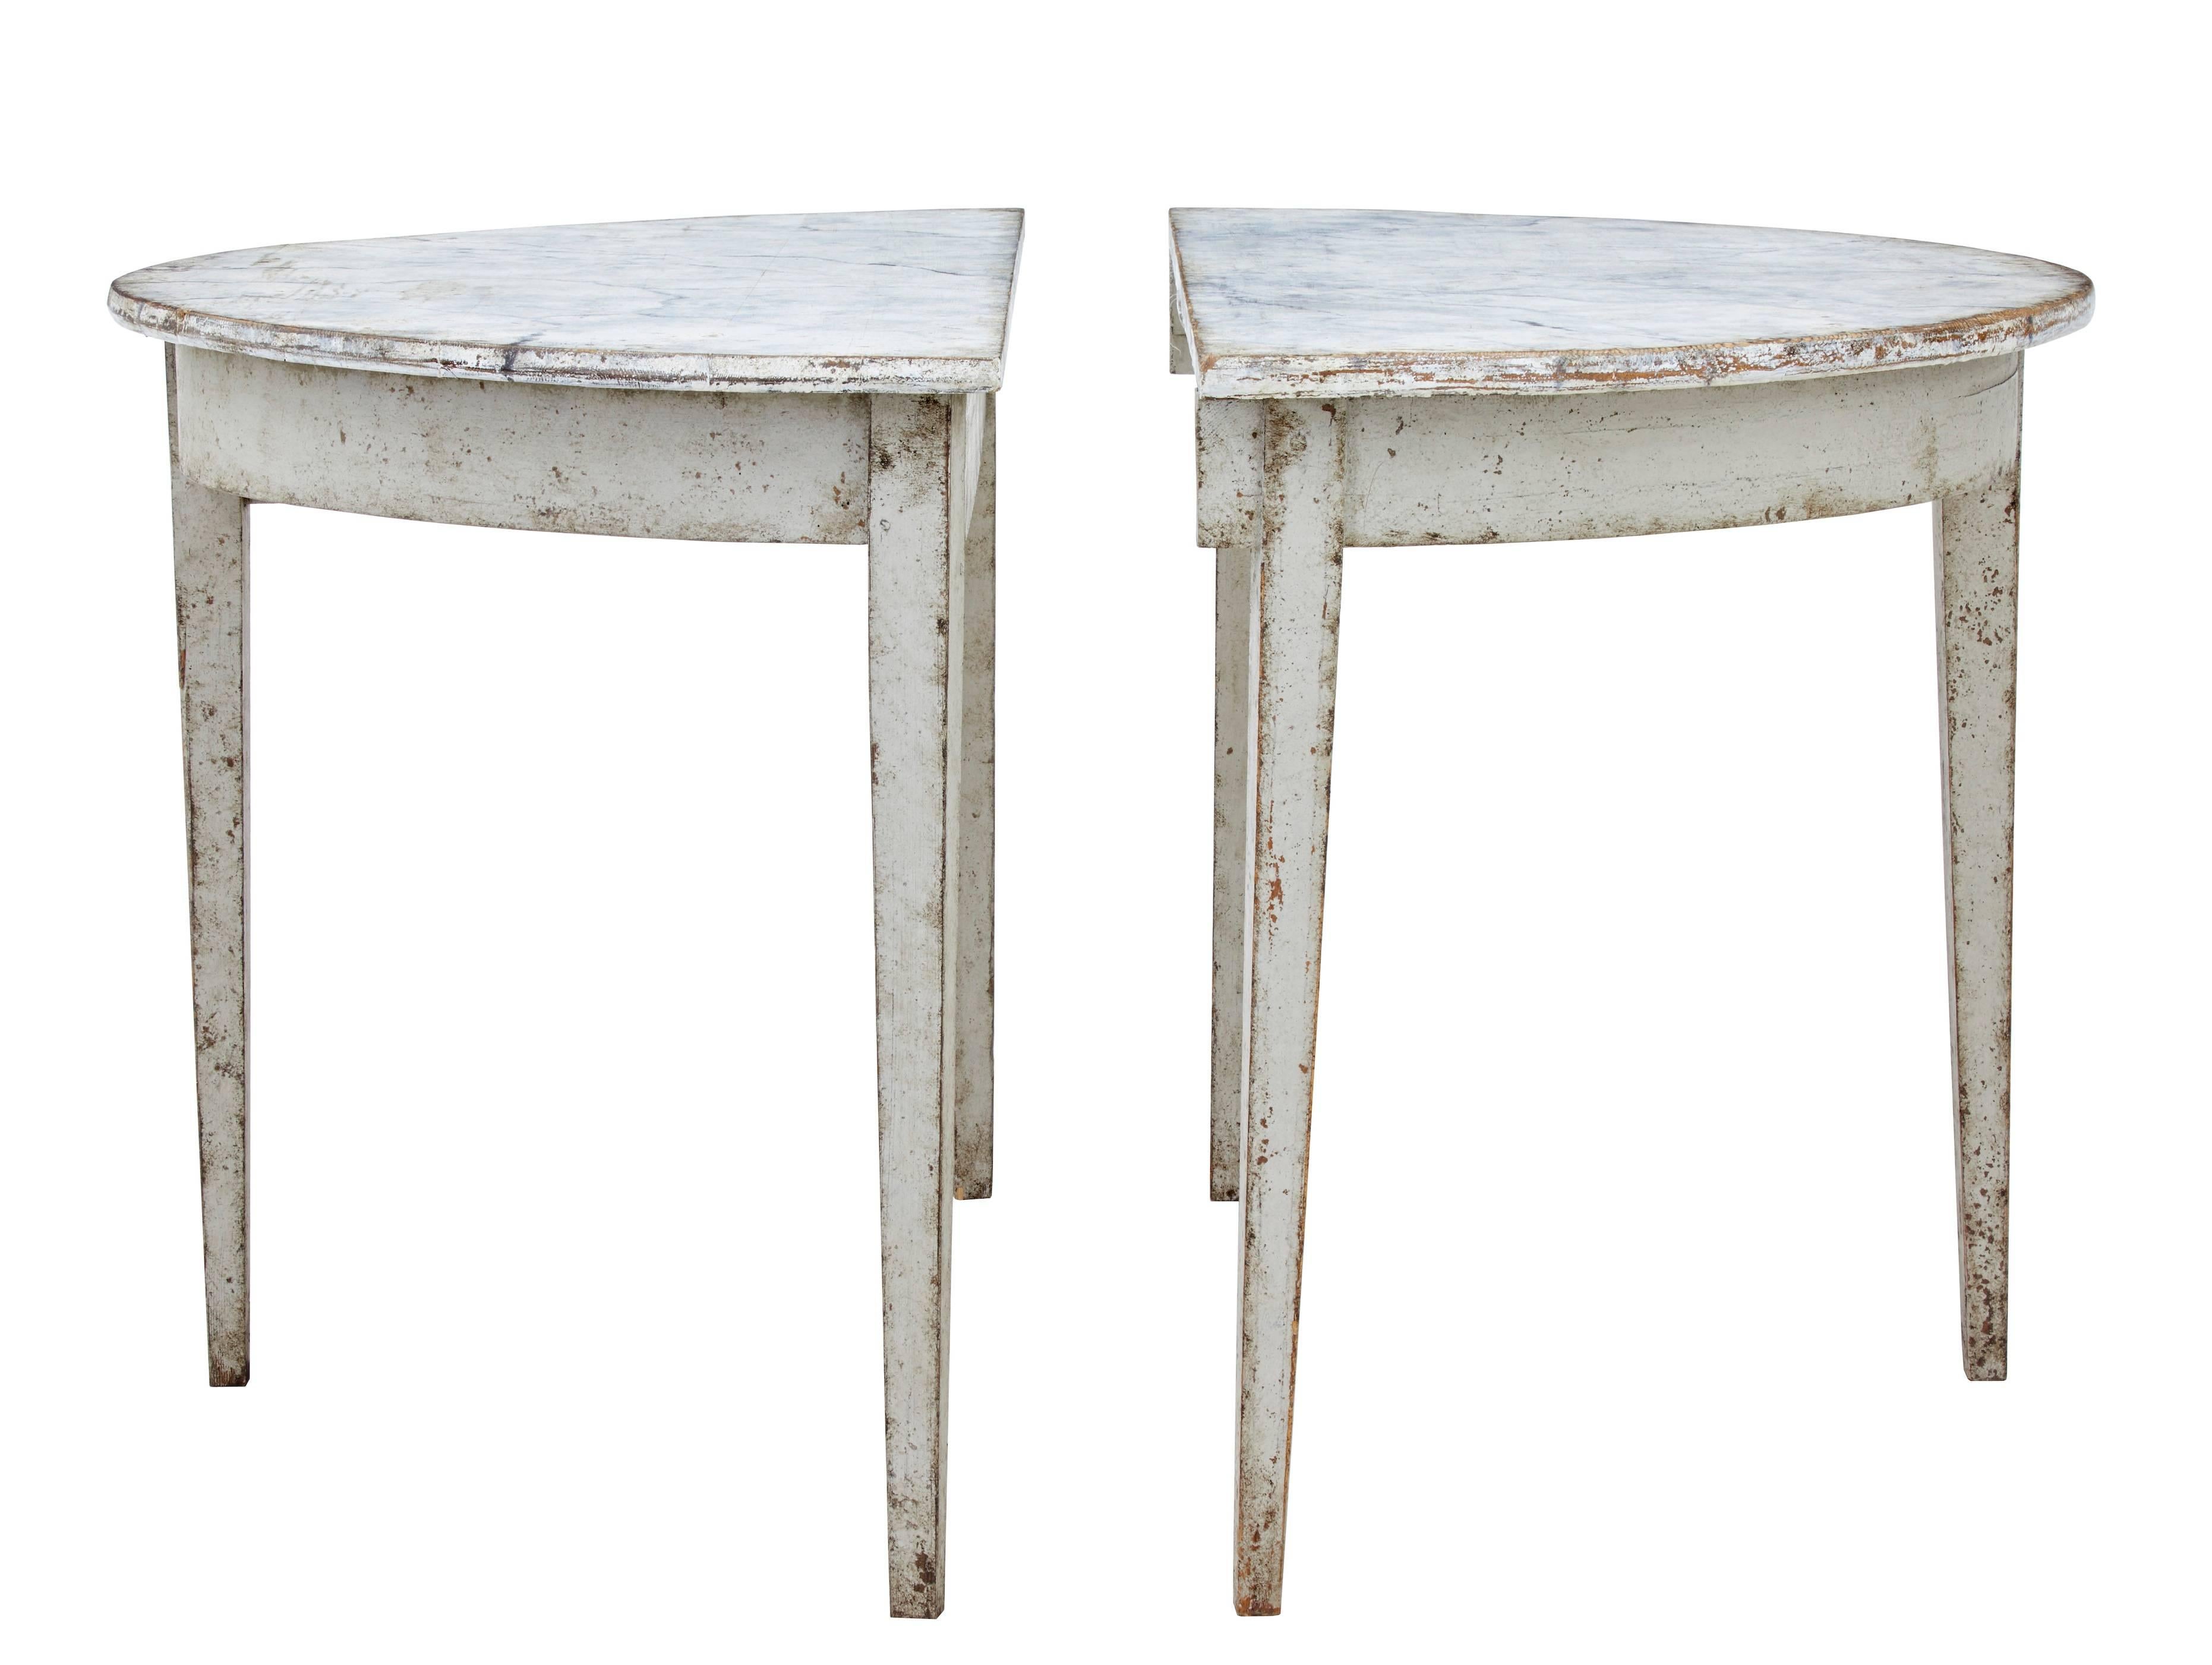 Pair of demilune tables, circa 1870.
Faux marble painted top which is now in a distressed finish.
Each pine table is standing on three tapering legs.
Could be used as a pair of occasional tables or form a round table.
Later paint.
One small